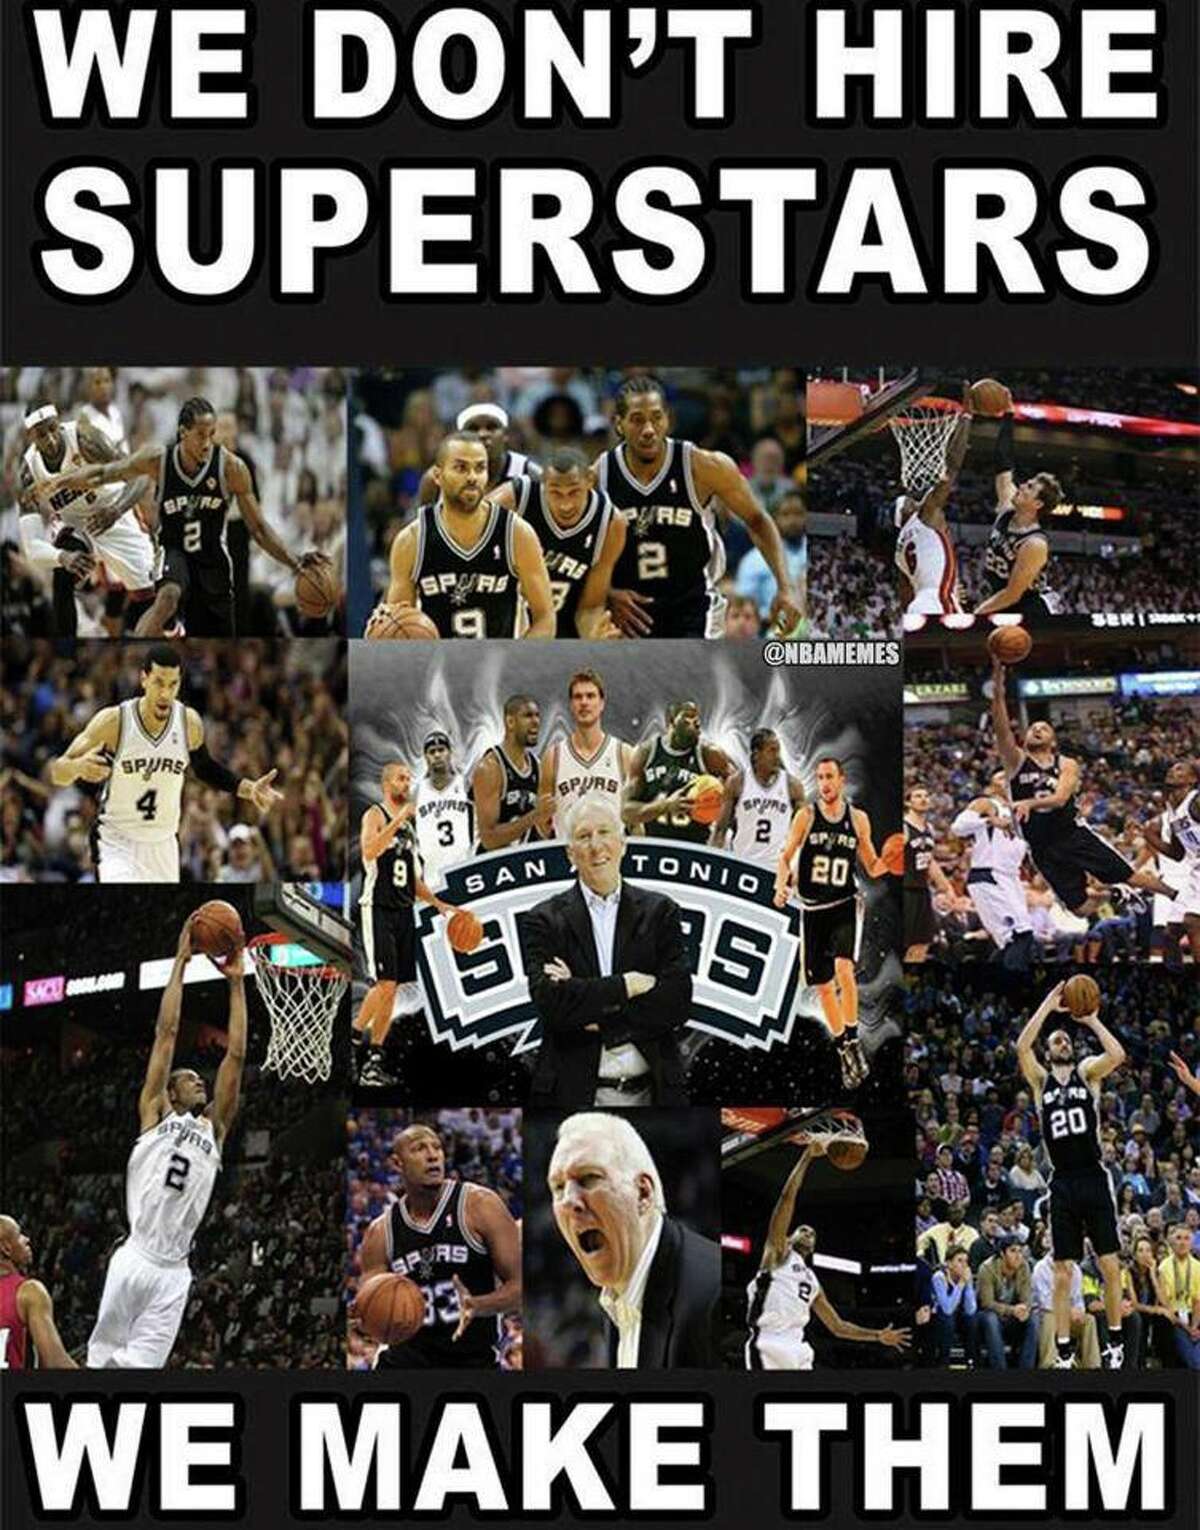 With the NBA season over and the Spurs’ fifth NBA title in hands, here’s a look at the some of the better memes that followed. Because if you can’t count on the Internet for a deluge of quippy taunts following a championship, then what good is the Internet?